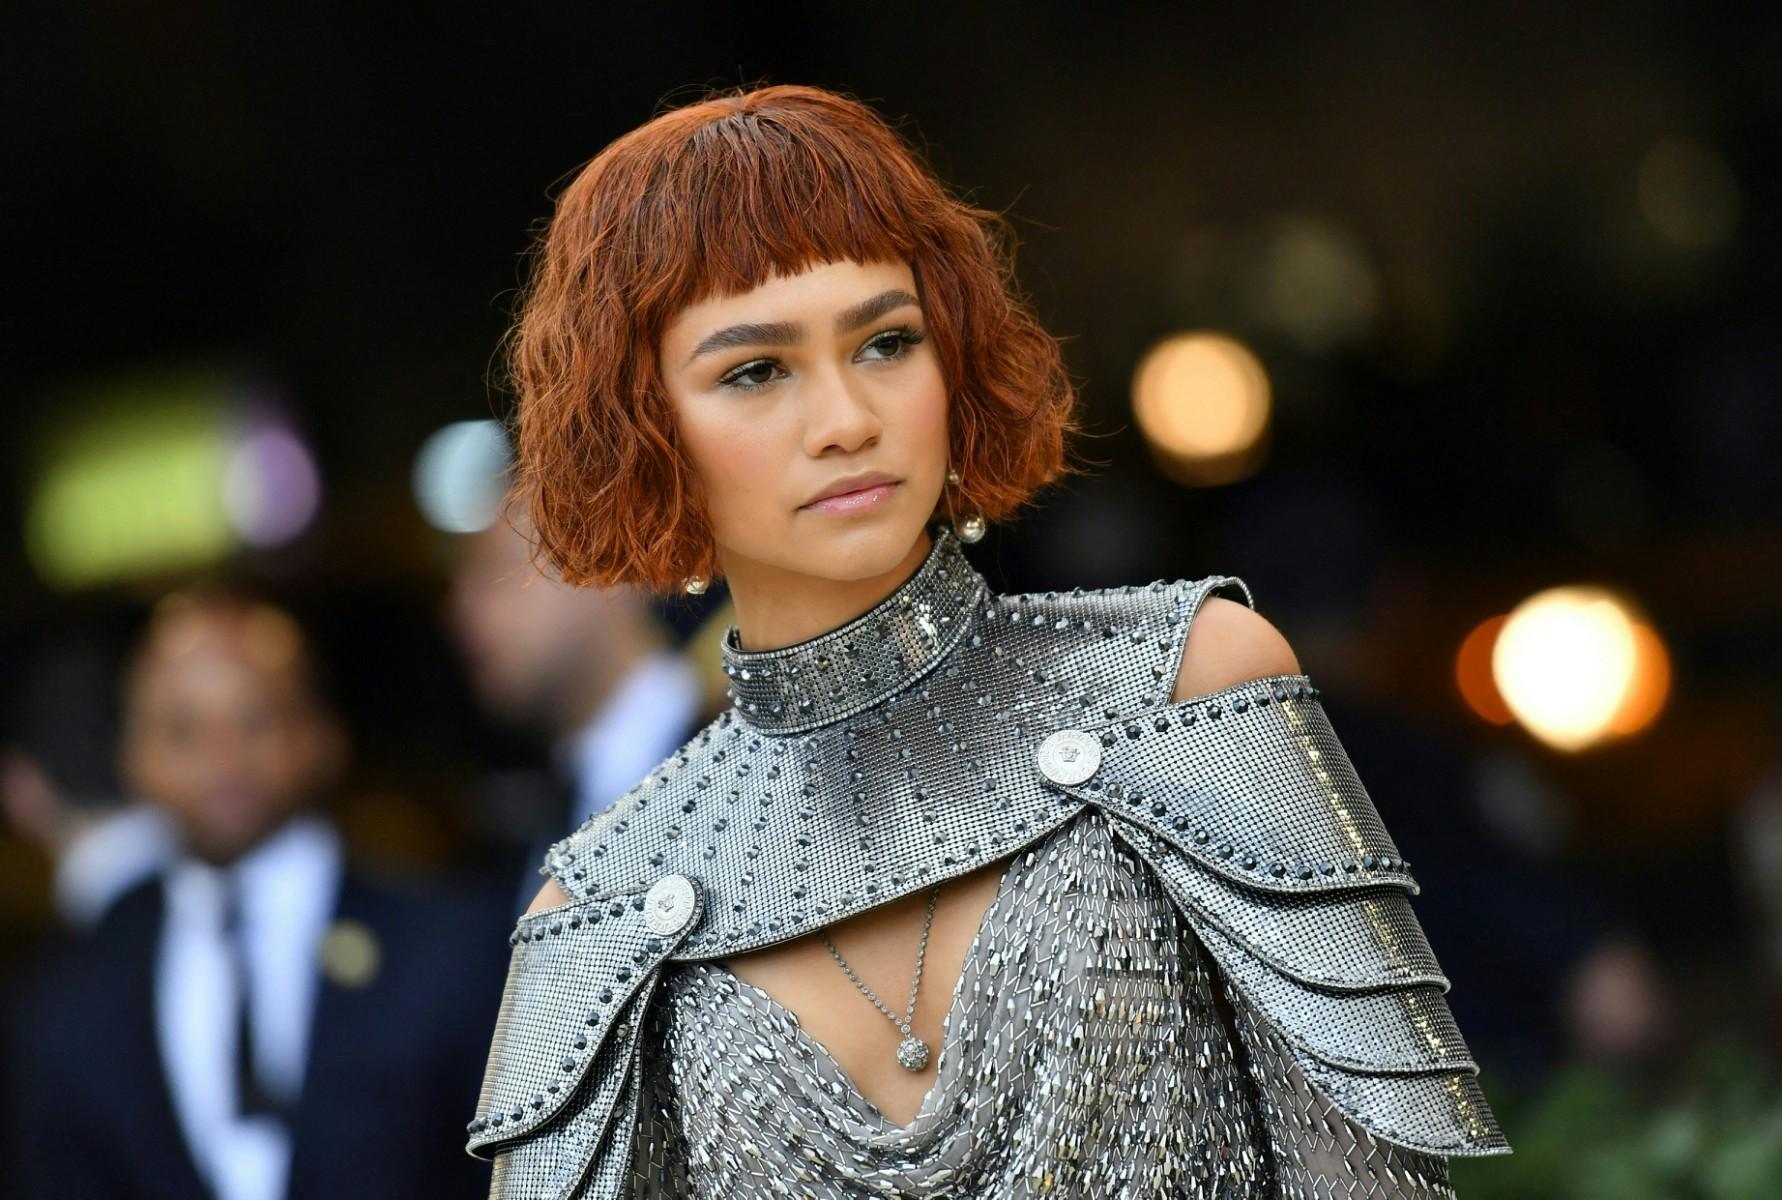 Zendaya's special metallic Versace dress has a neck and shoulder piece that looks like armor, shiny chainmail, a belt with spikes, and a simple train. She also wore a cropped wig that resembled the famous bob hairstyle of The Maid of Orleans. (Pic/AFP)